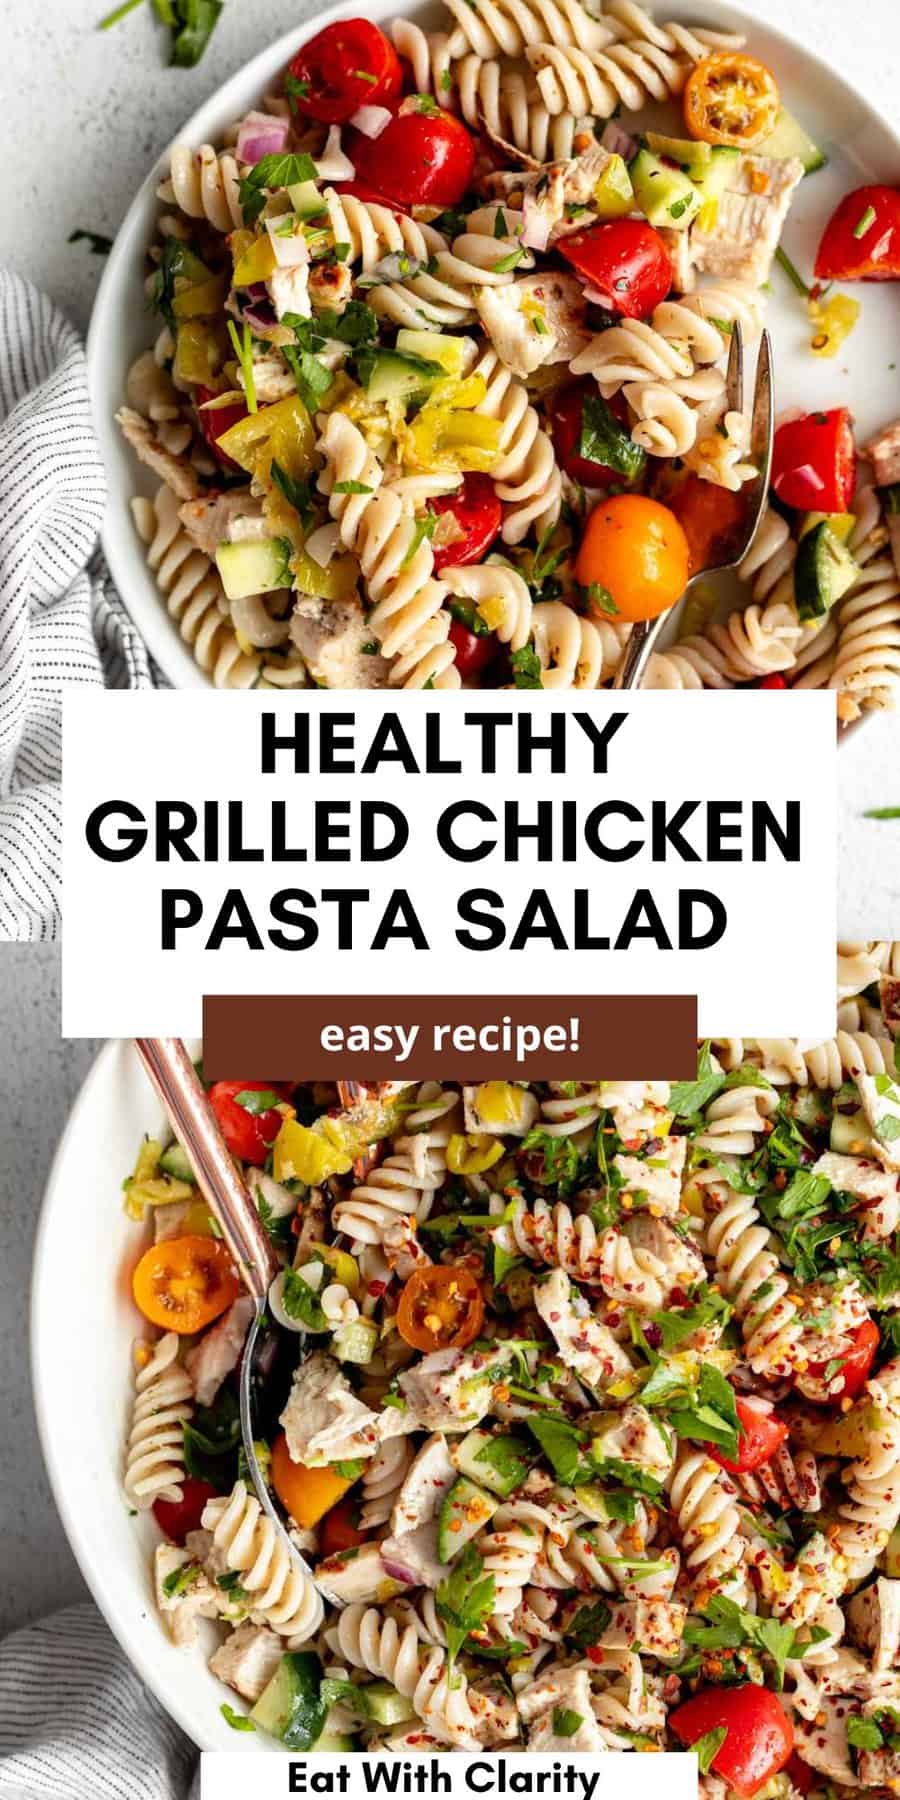 Gluten Free Pasta Salad - Eat With Clarity